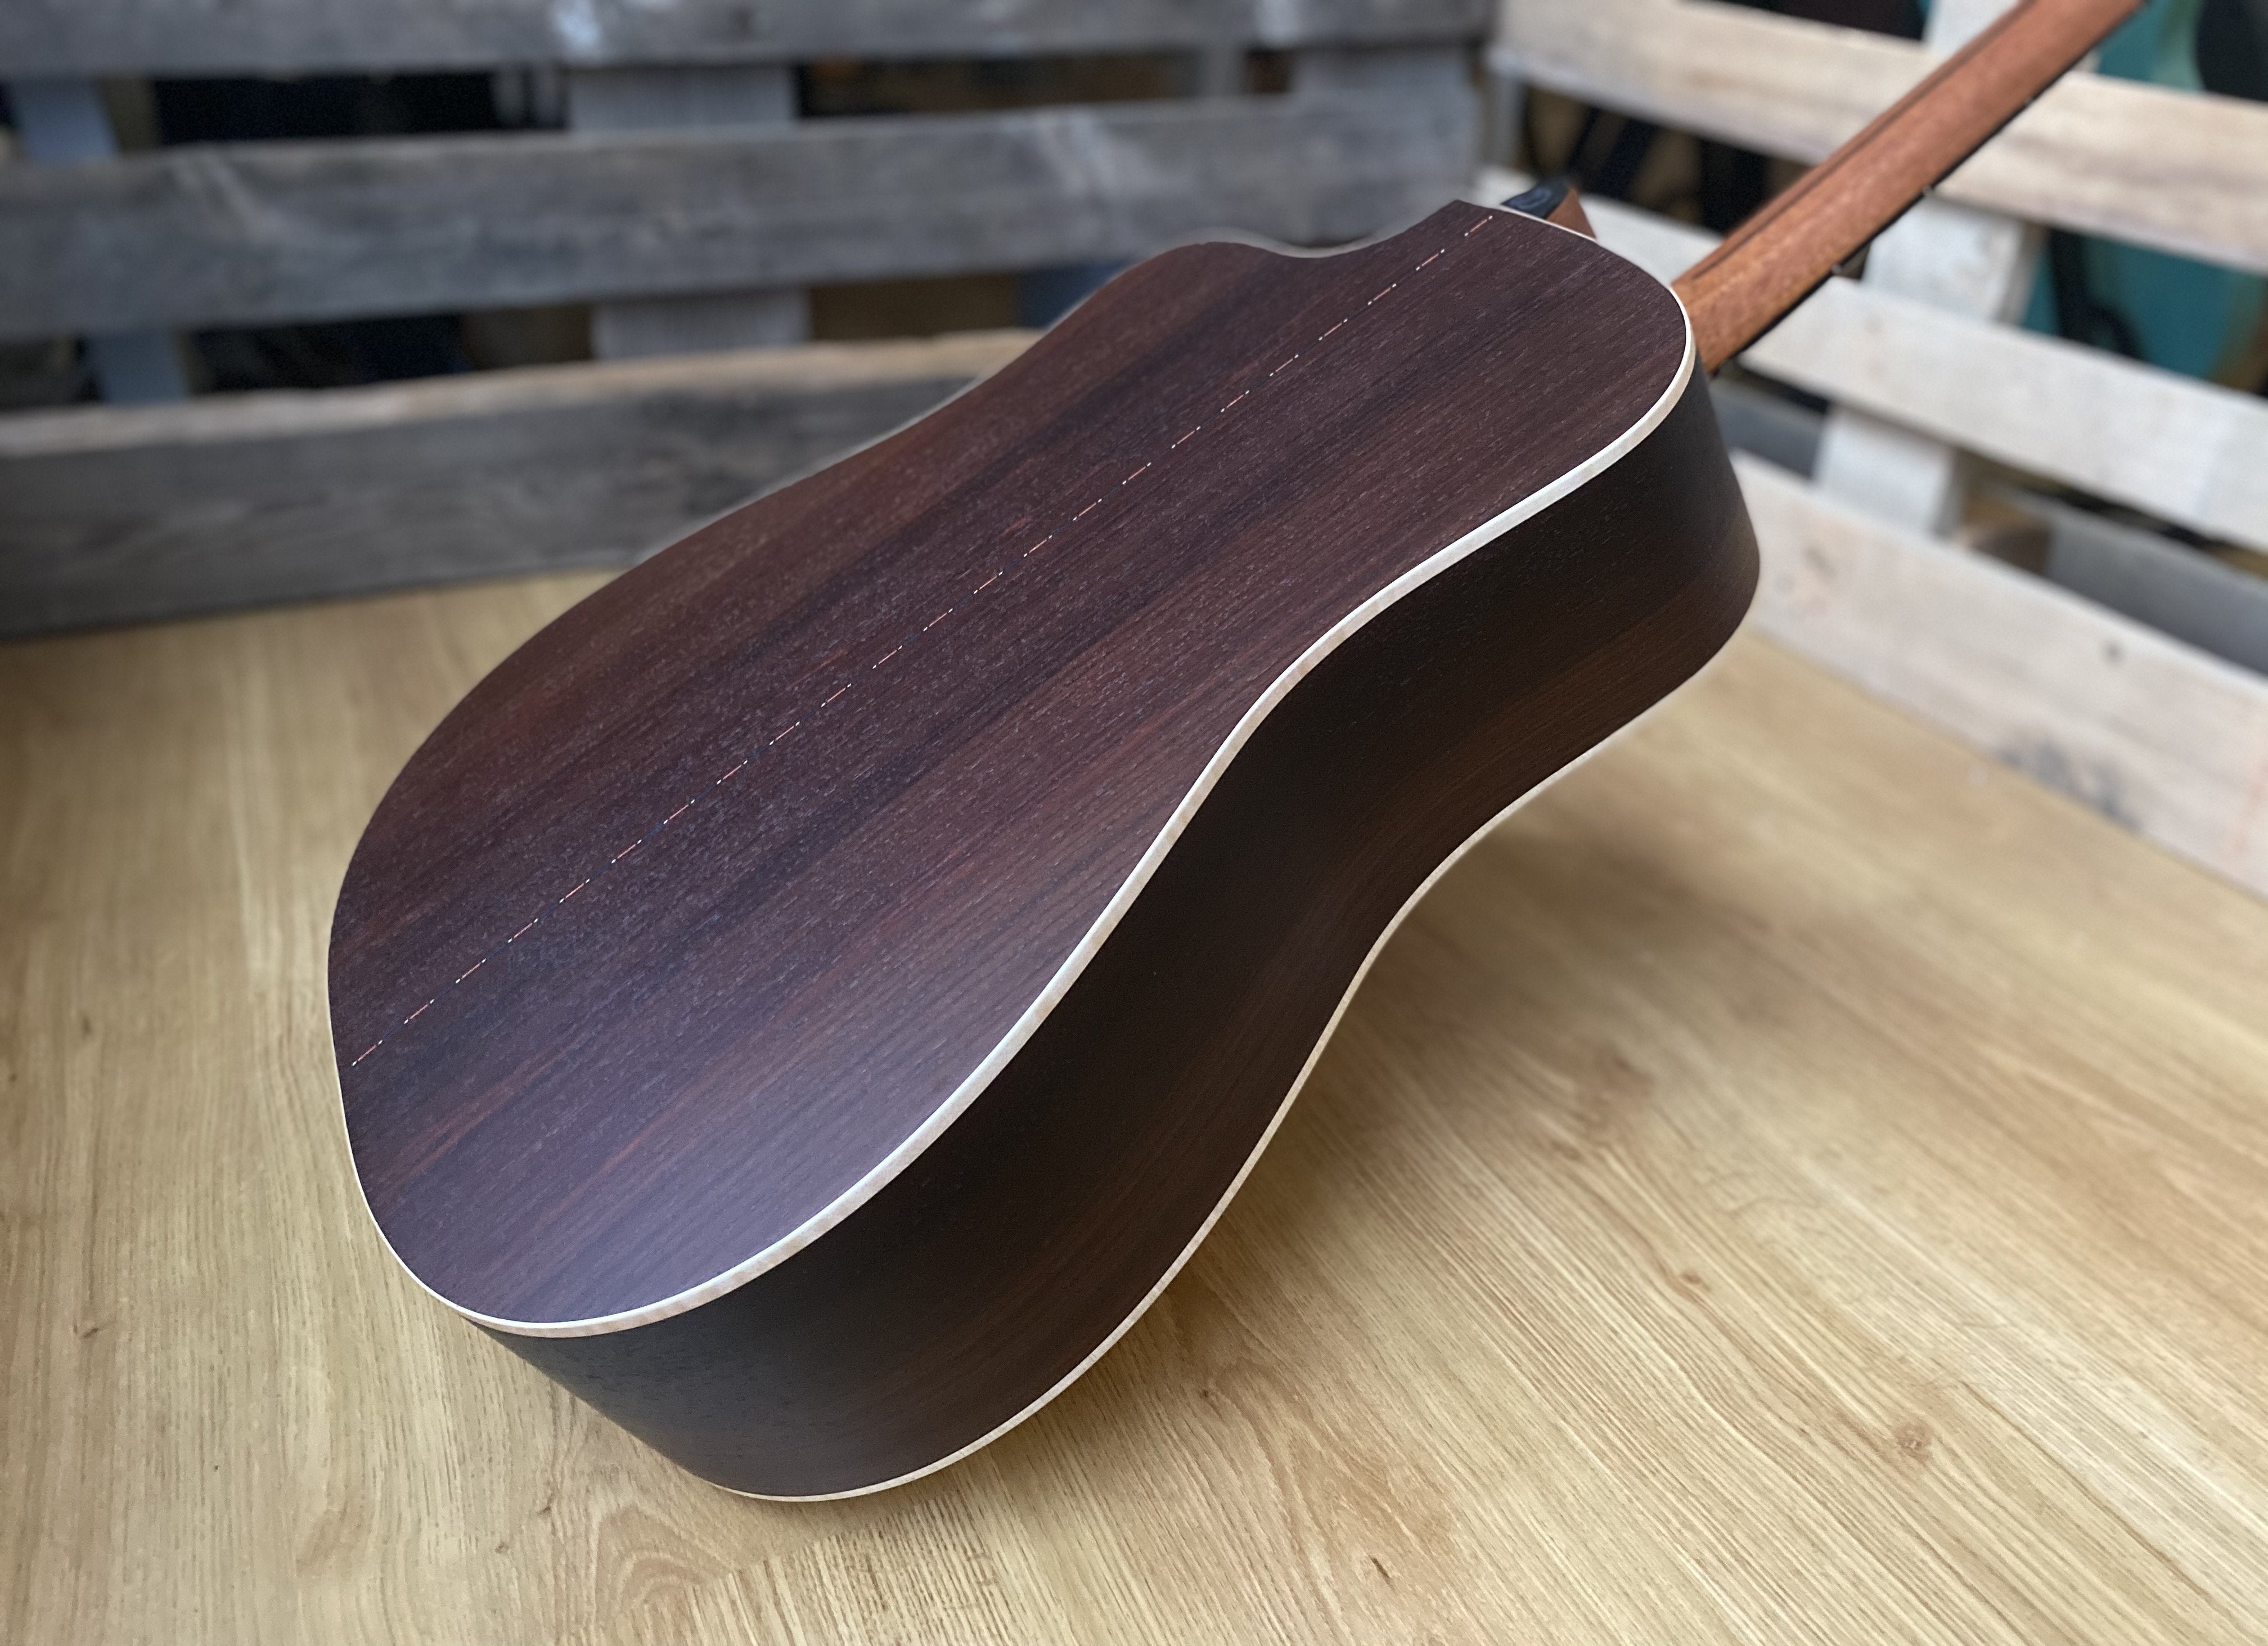 Dowina Rosewood (Ceres) DC-DS, Acoustic Guitar for sale at Richards Guitars.